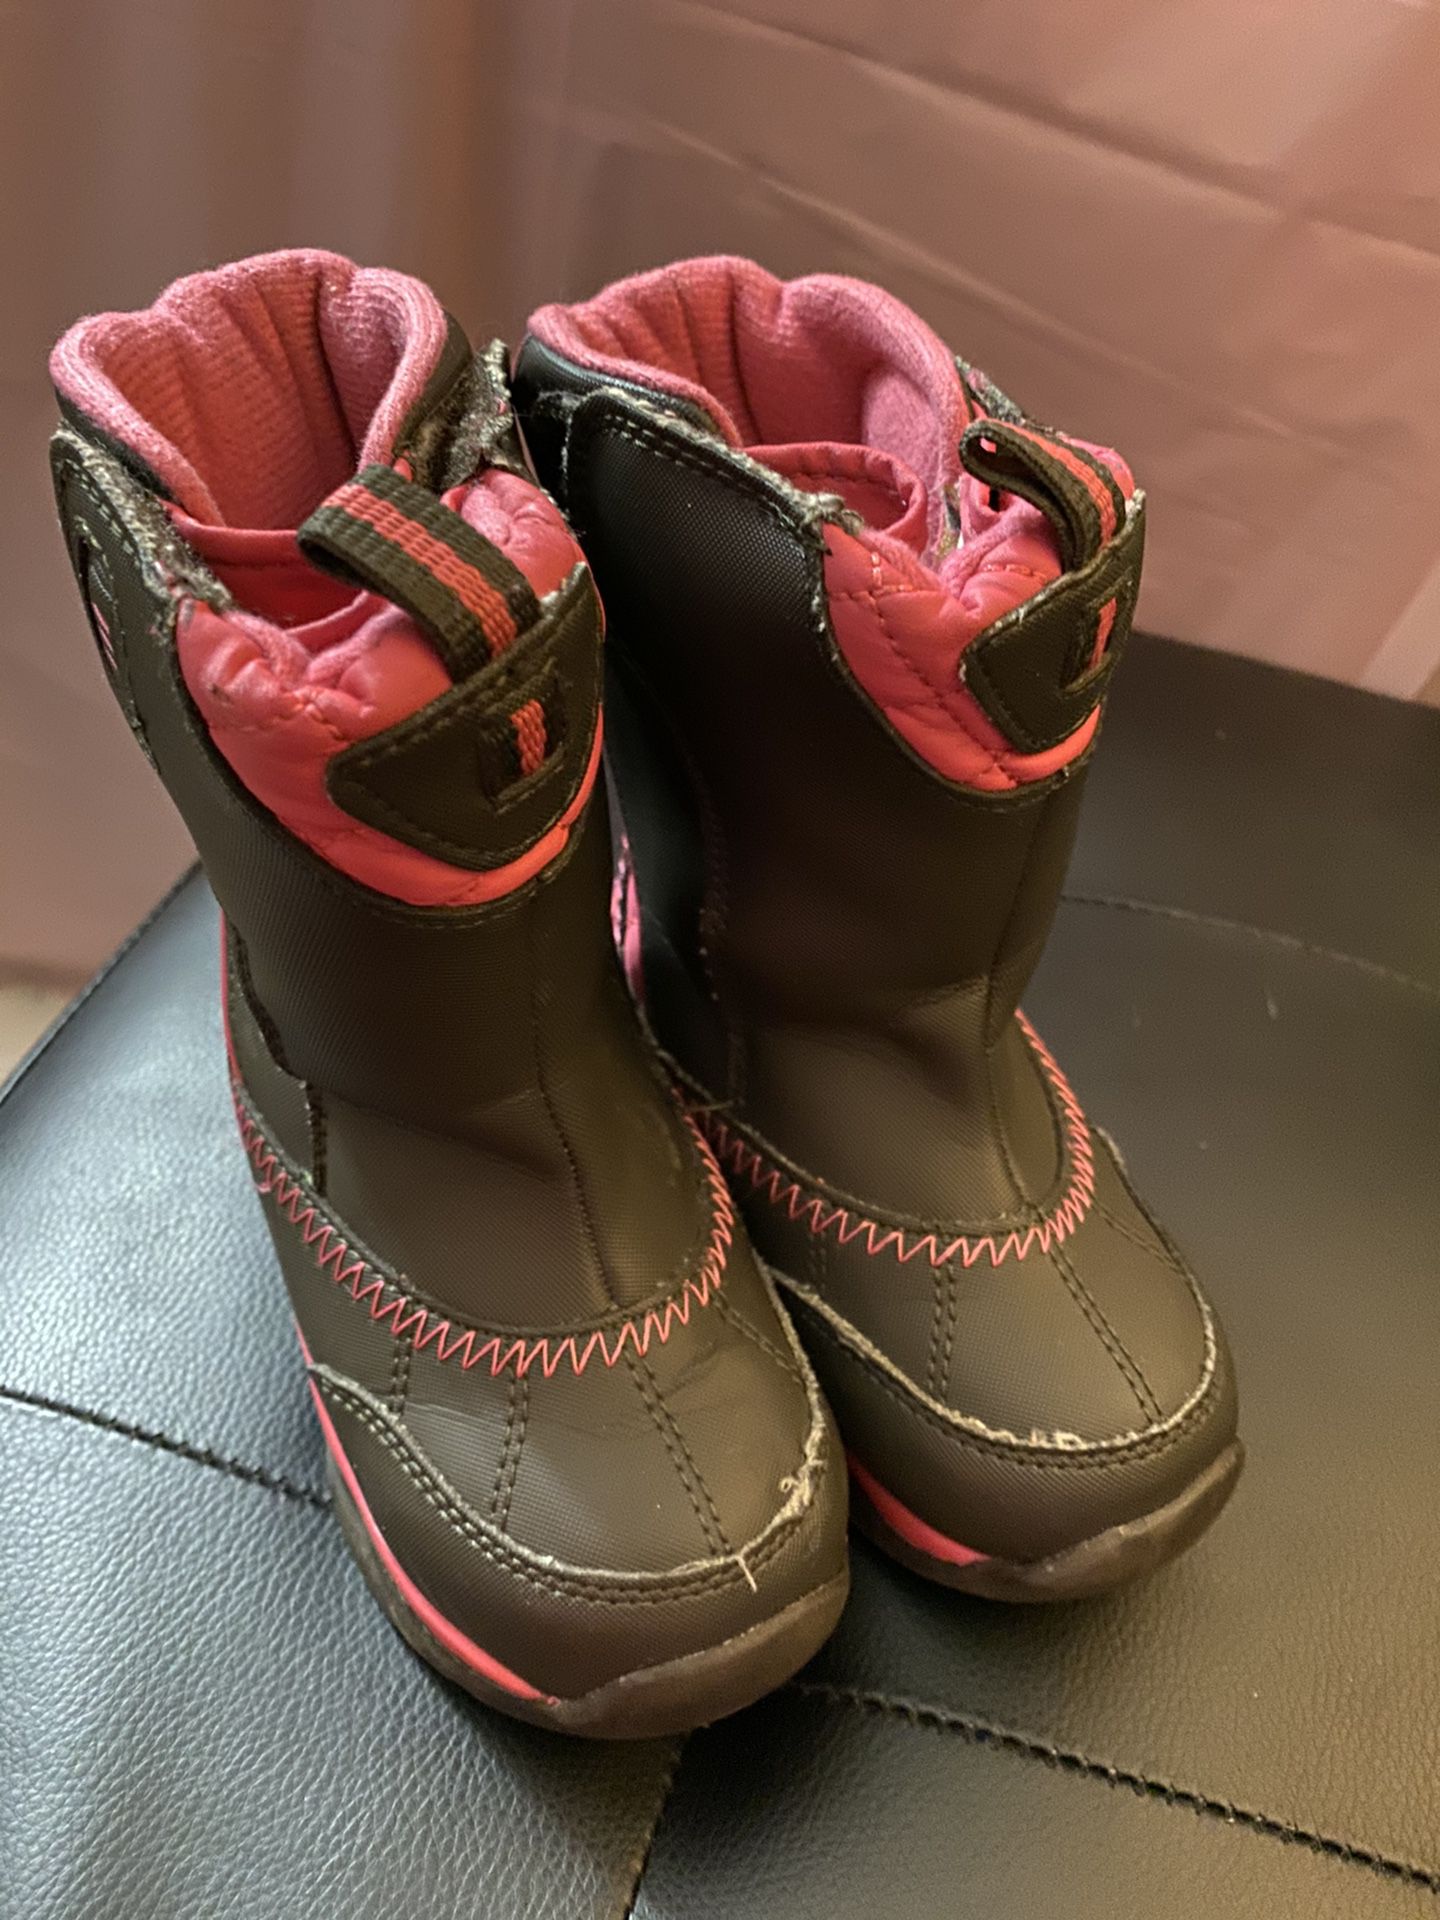 Girl’s winter boots